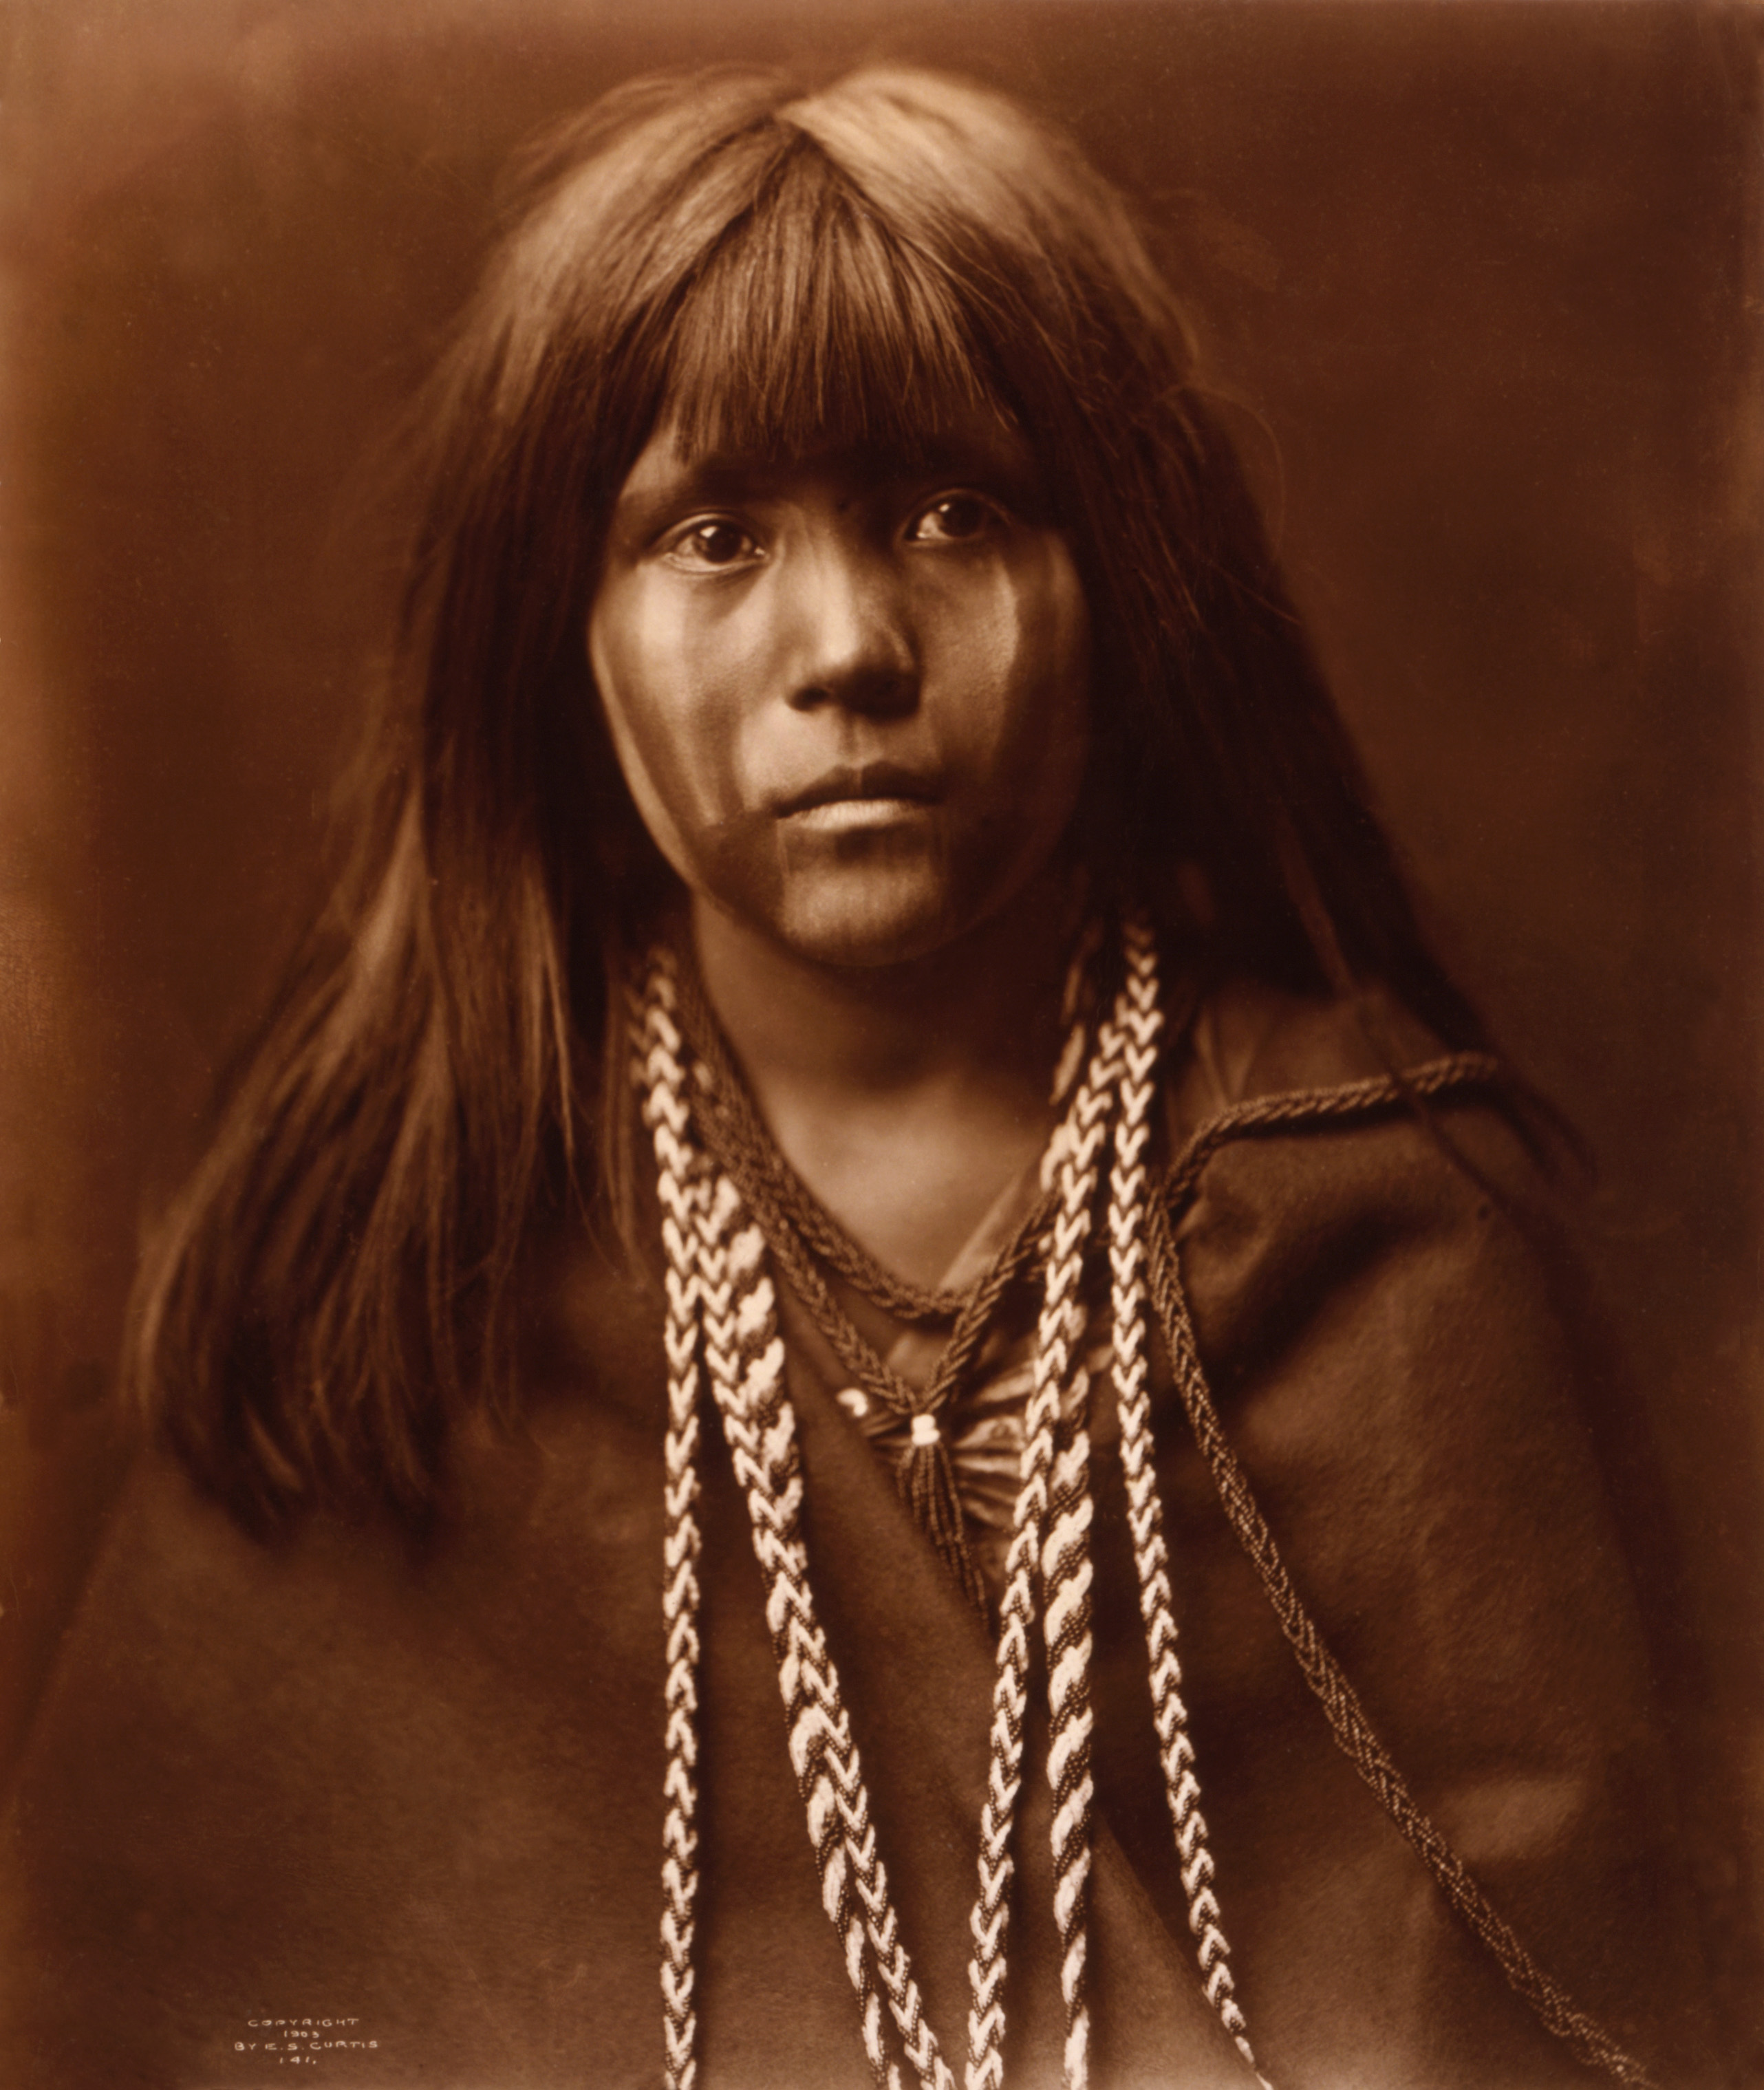 Mosa, Mohave girl, by Edward S. Curtis, 1903